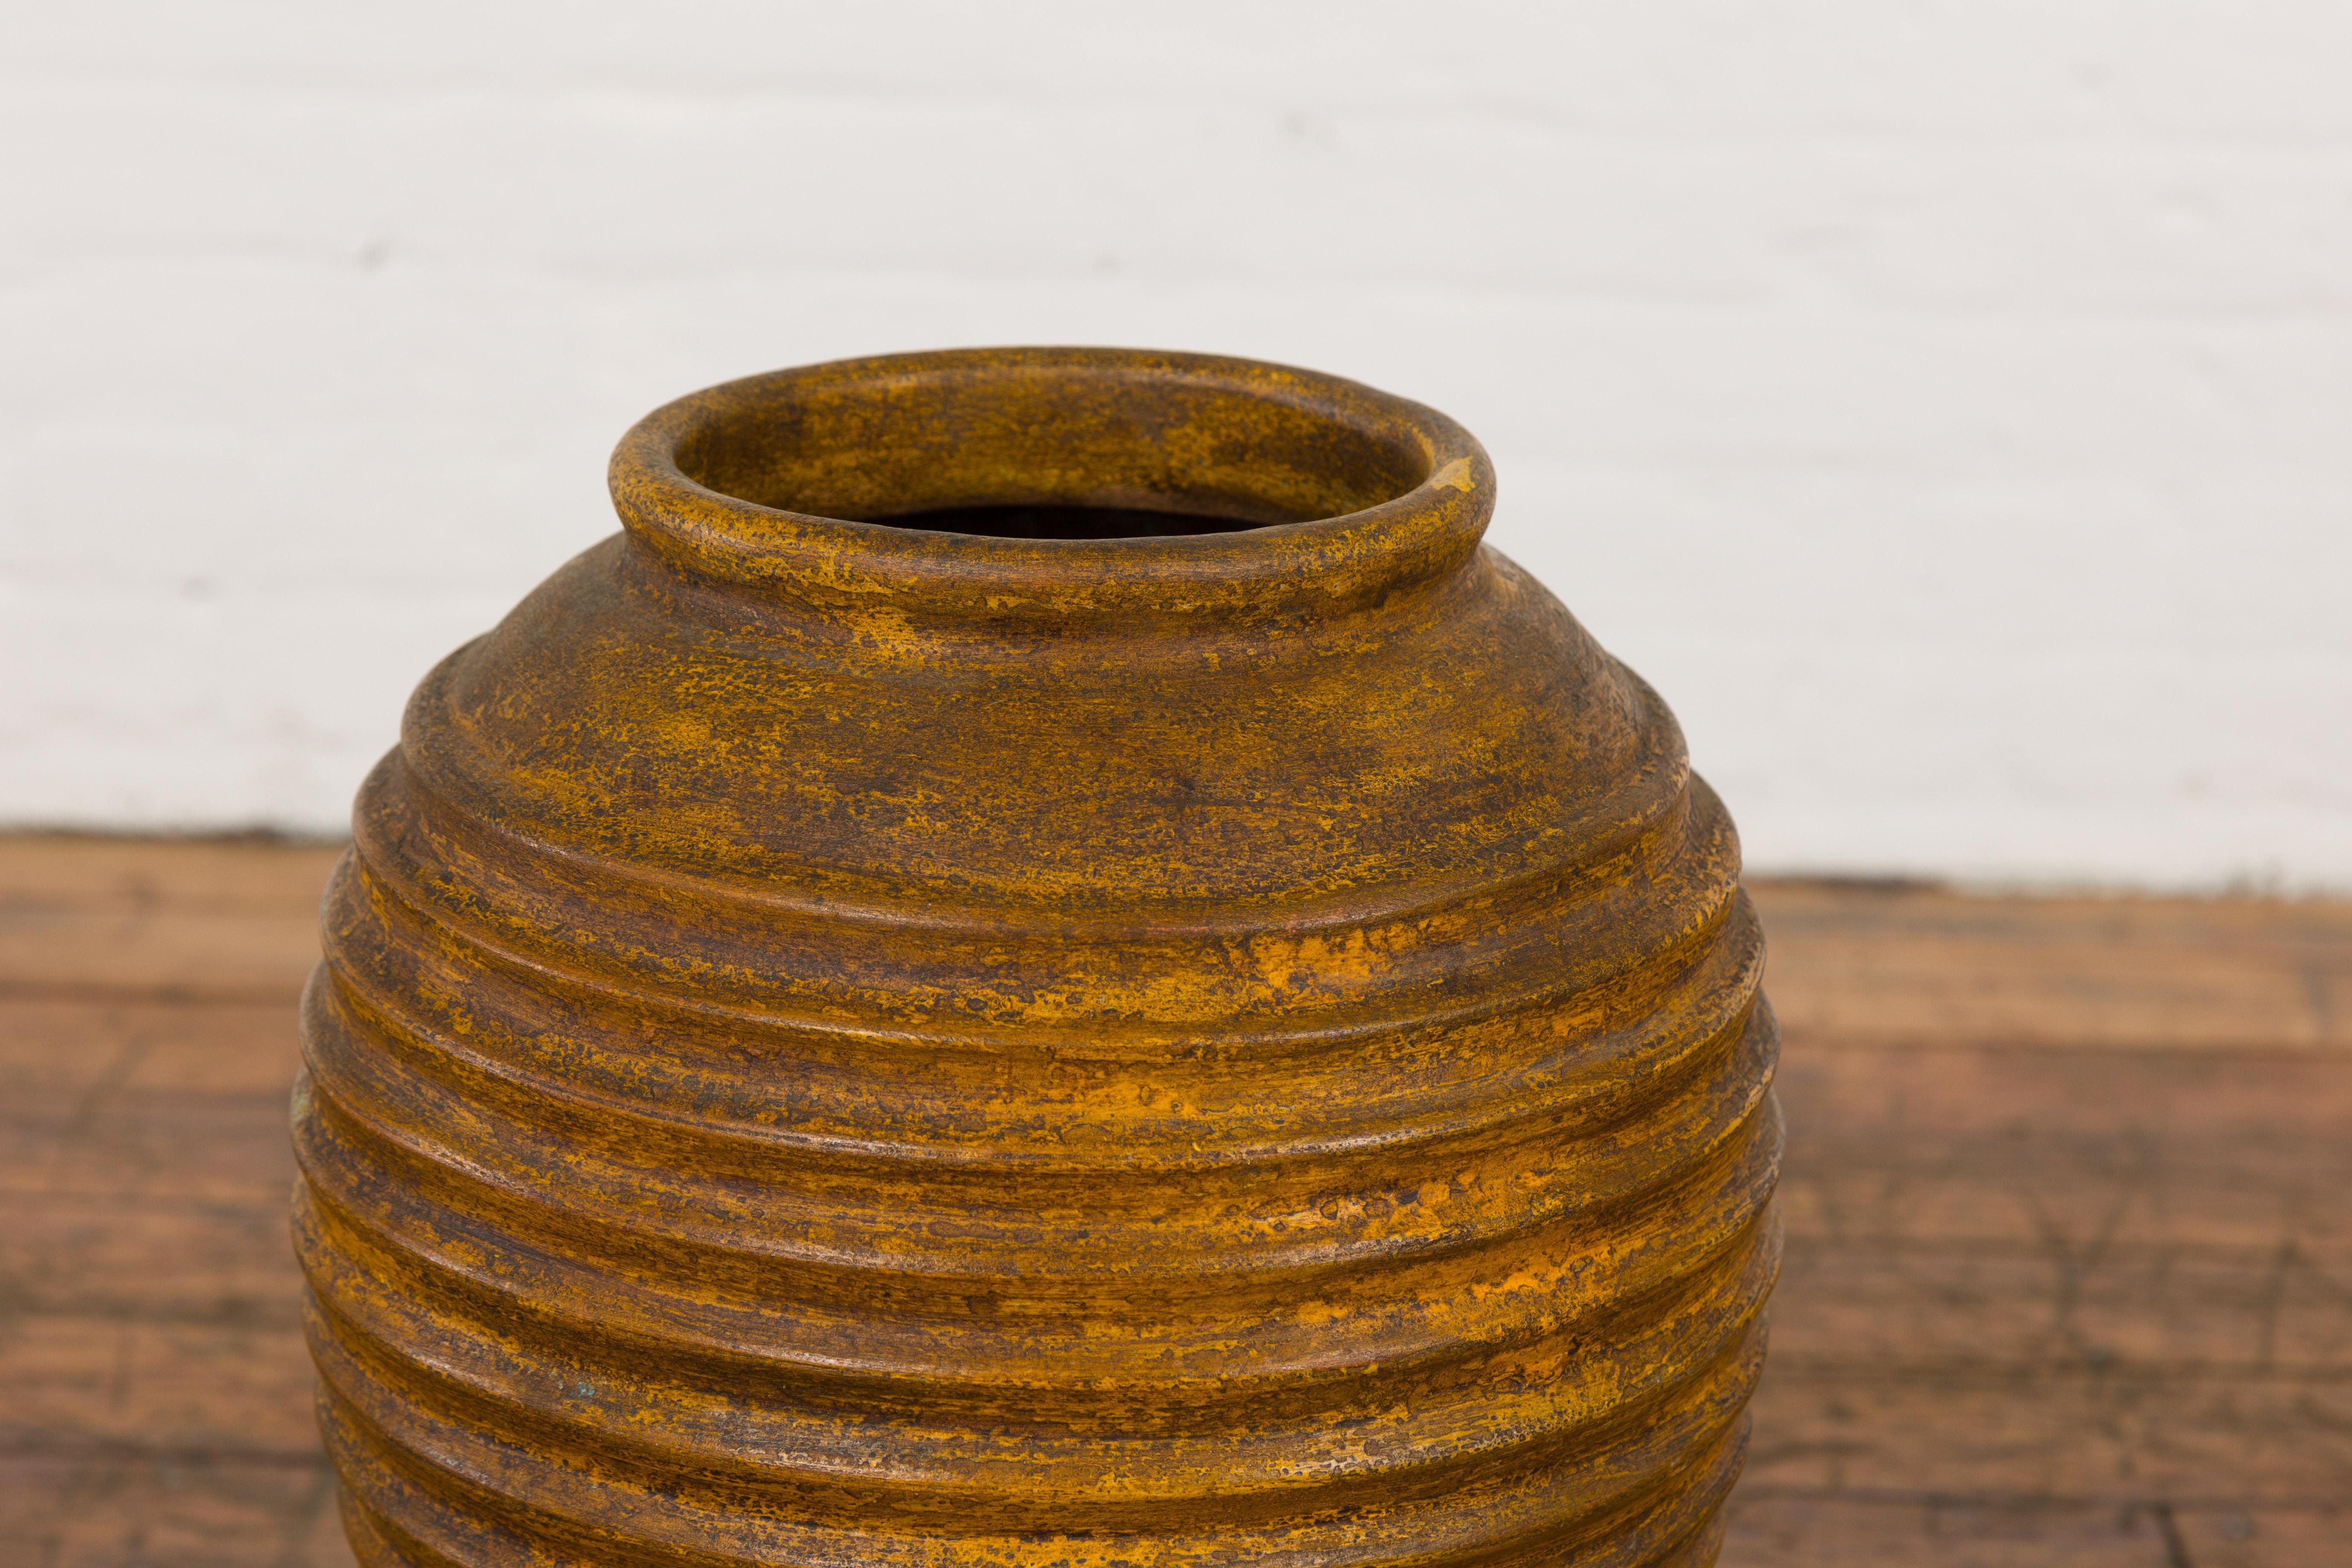 20th Century Yellow and Brown Storage Vase with Concentric Design and Rustic Character